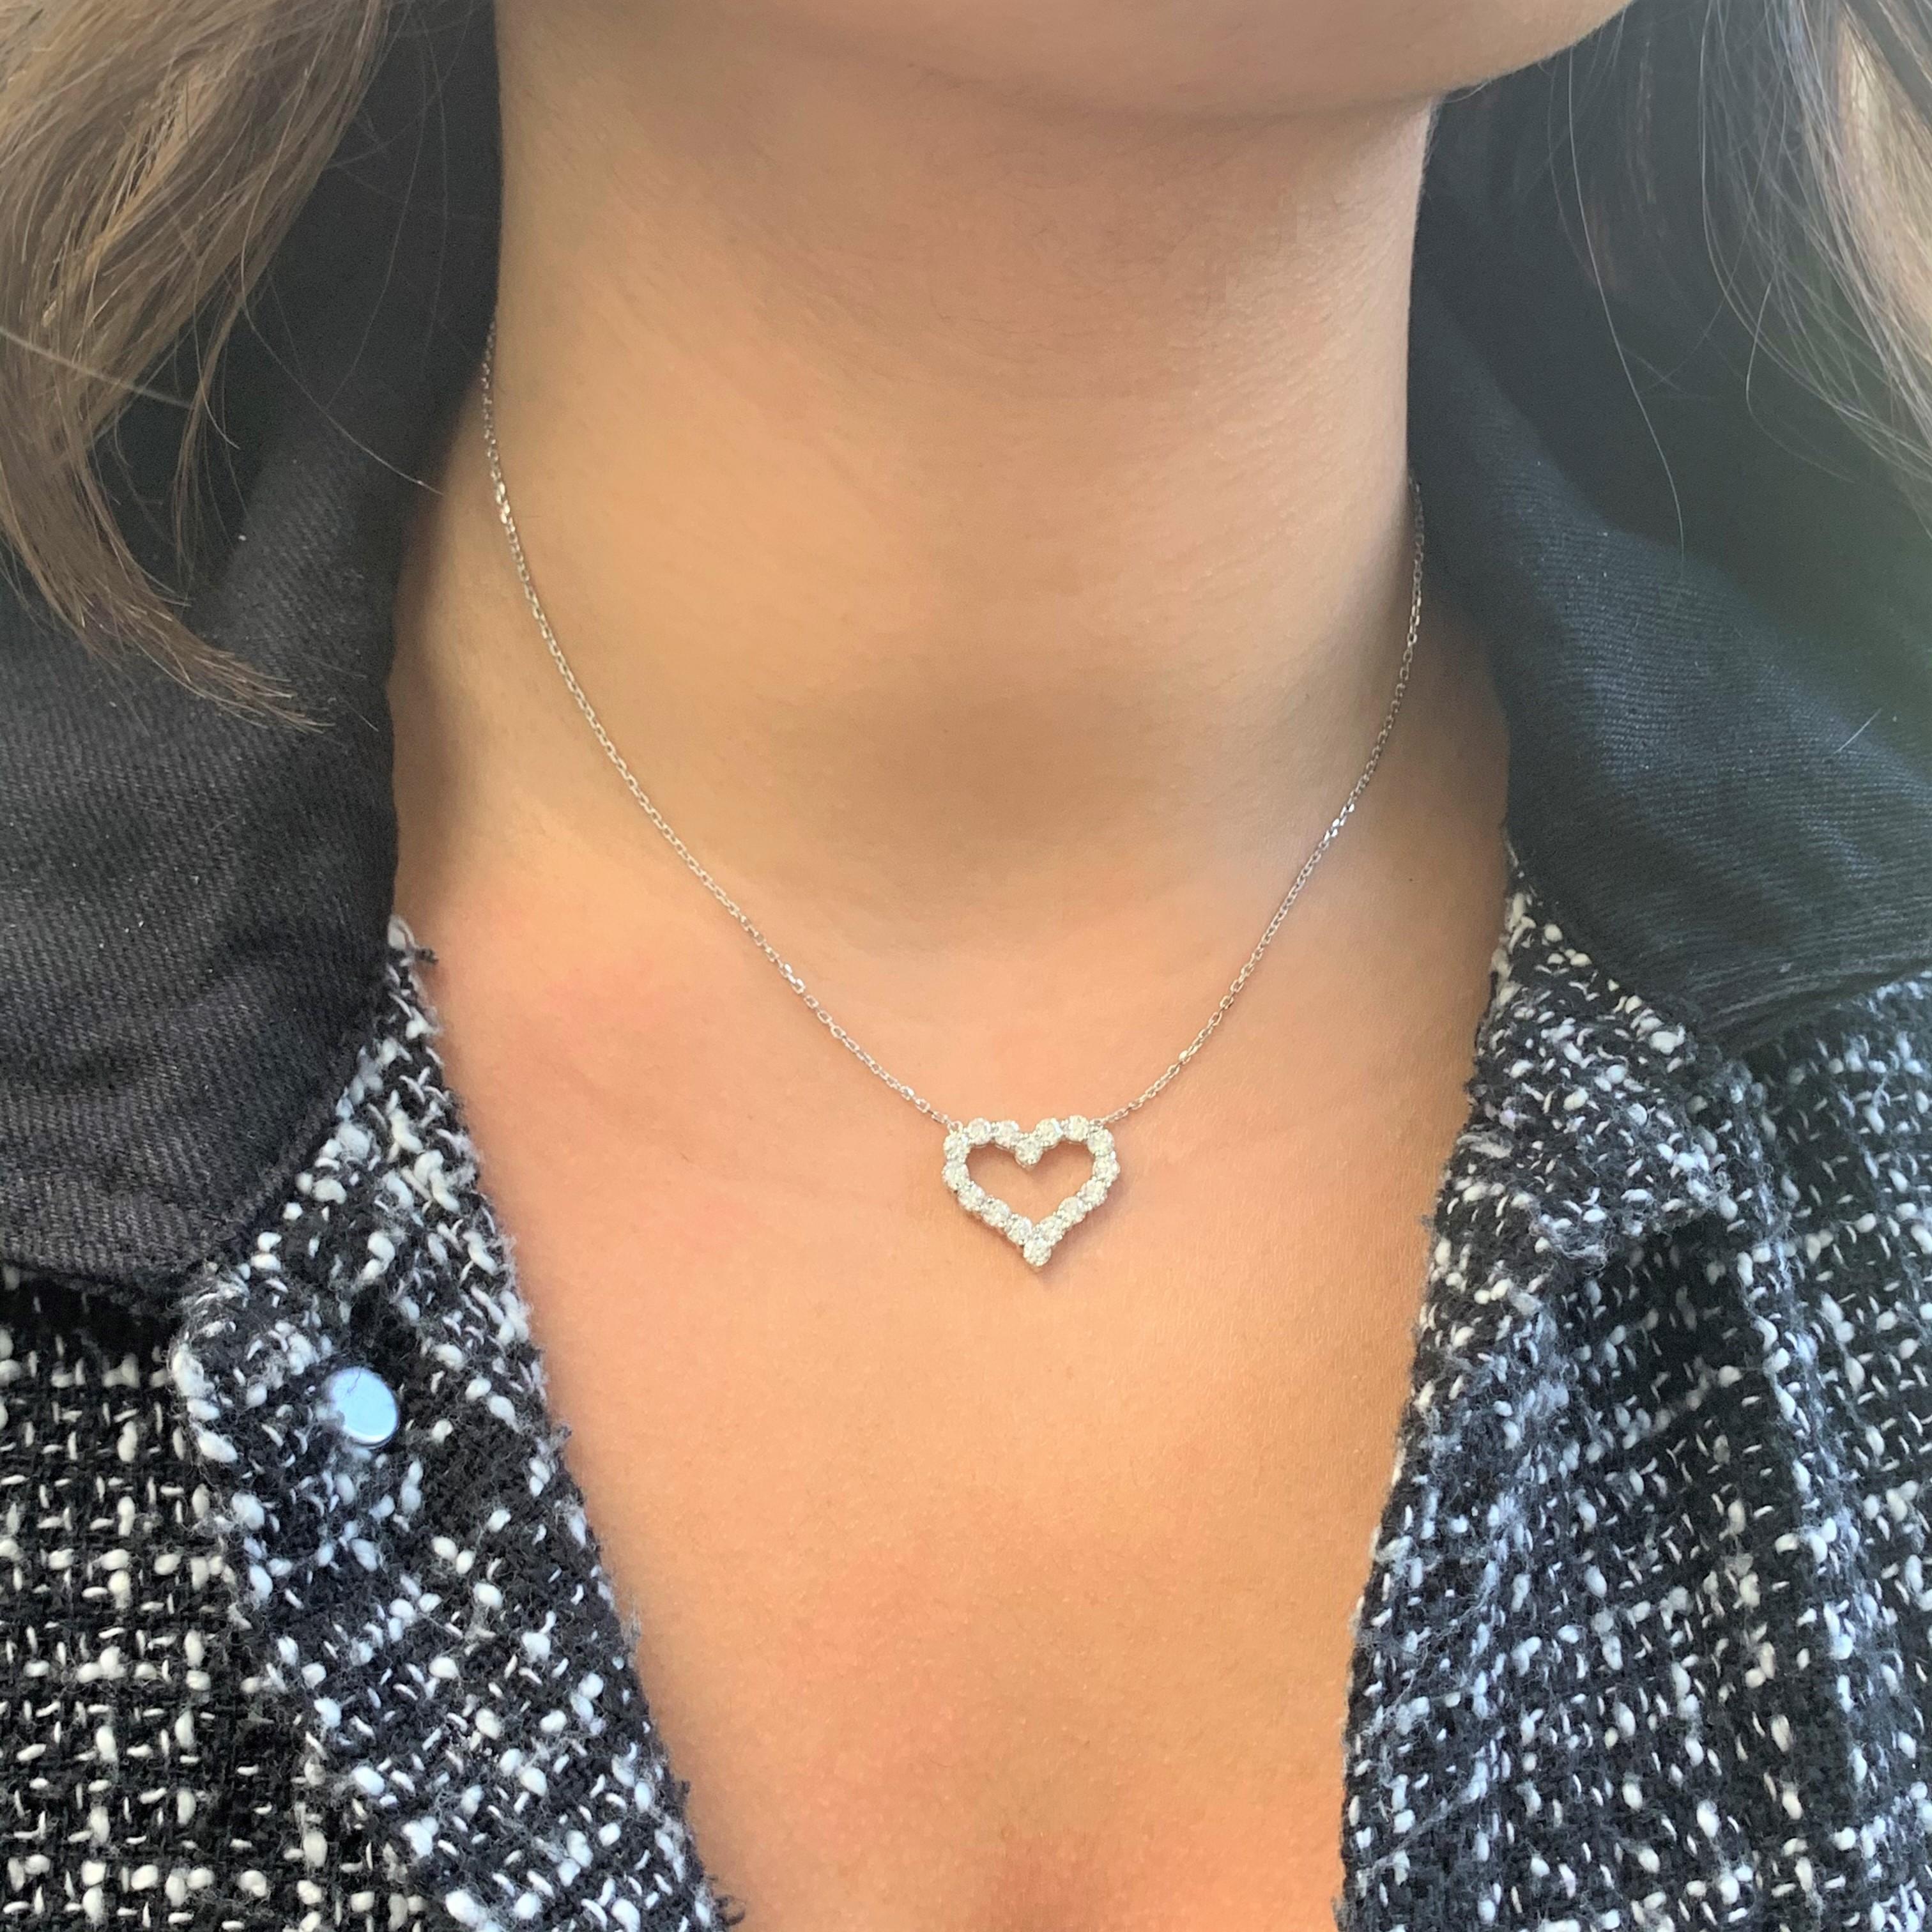 This is a Beautiful and Classic Heart Pendant crafted of 14K White Gold featuring 16 Natural Round White Diamonds weighing 1.60 carats. Hangs on an 18